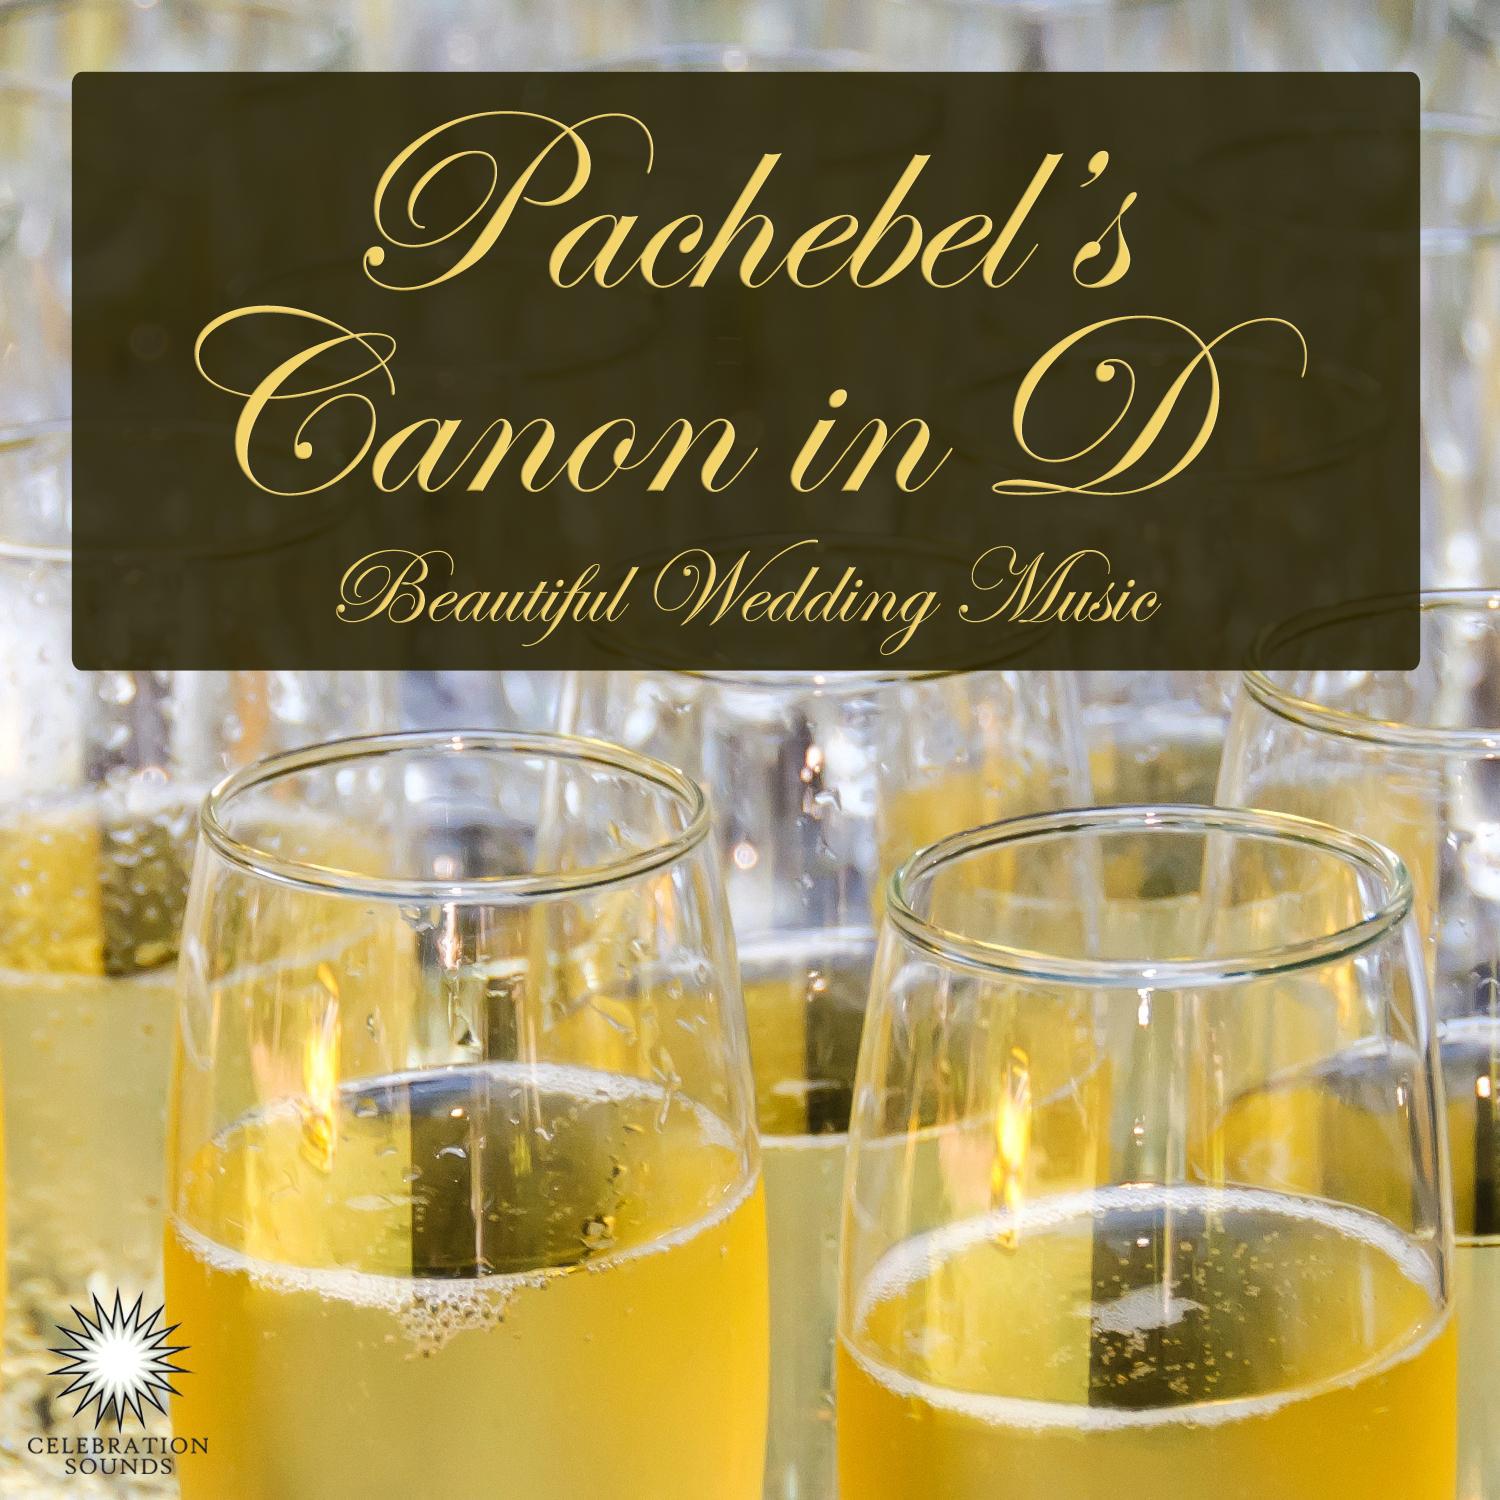 Pachebel's Canon in D: Beautiful Wedding Music